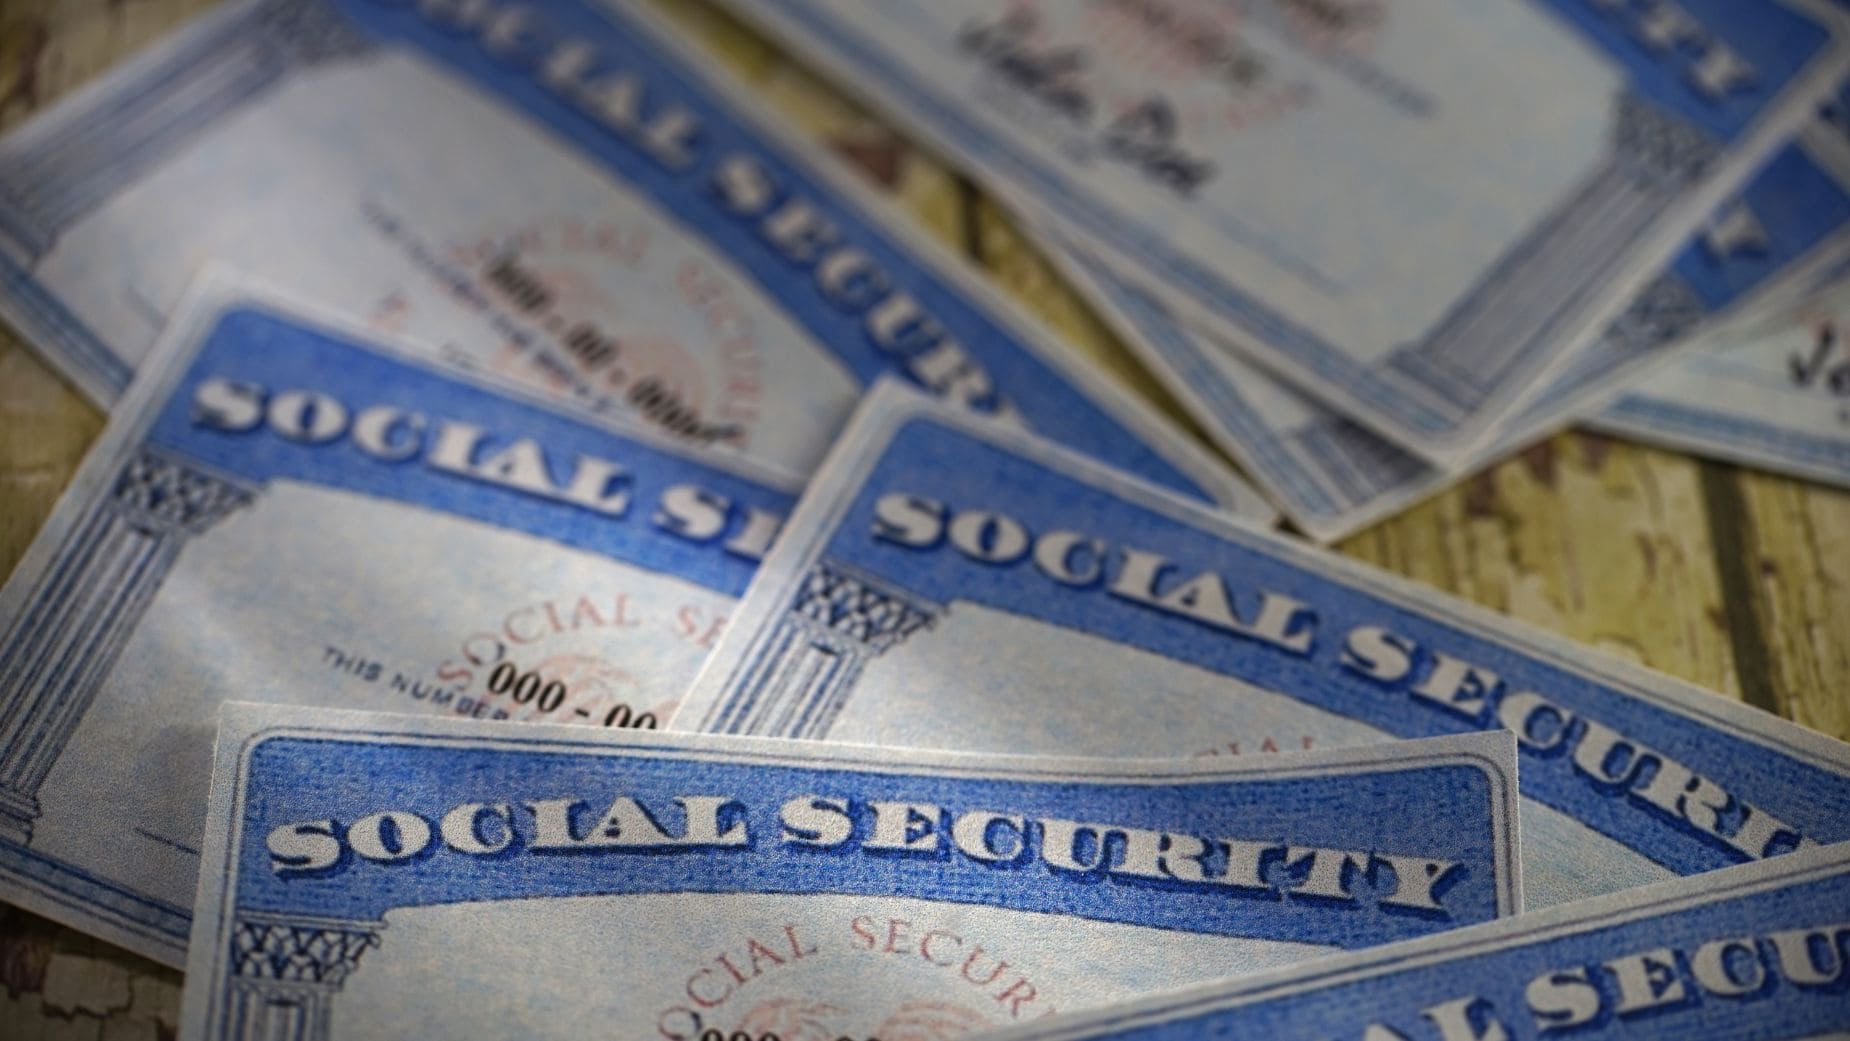 Social Security checks will arrive in the next month to some americans